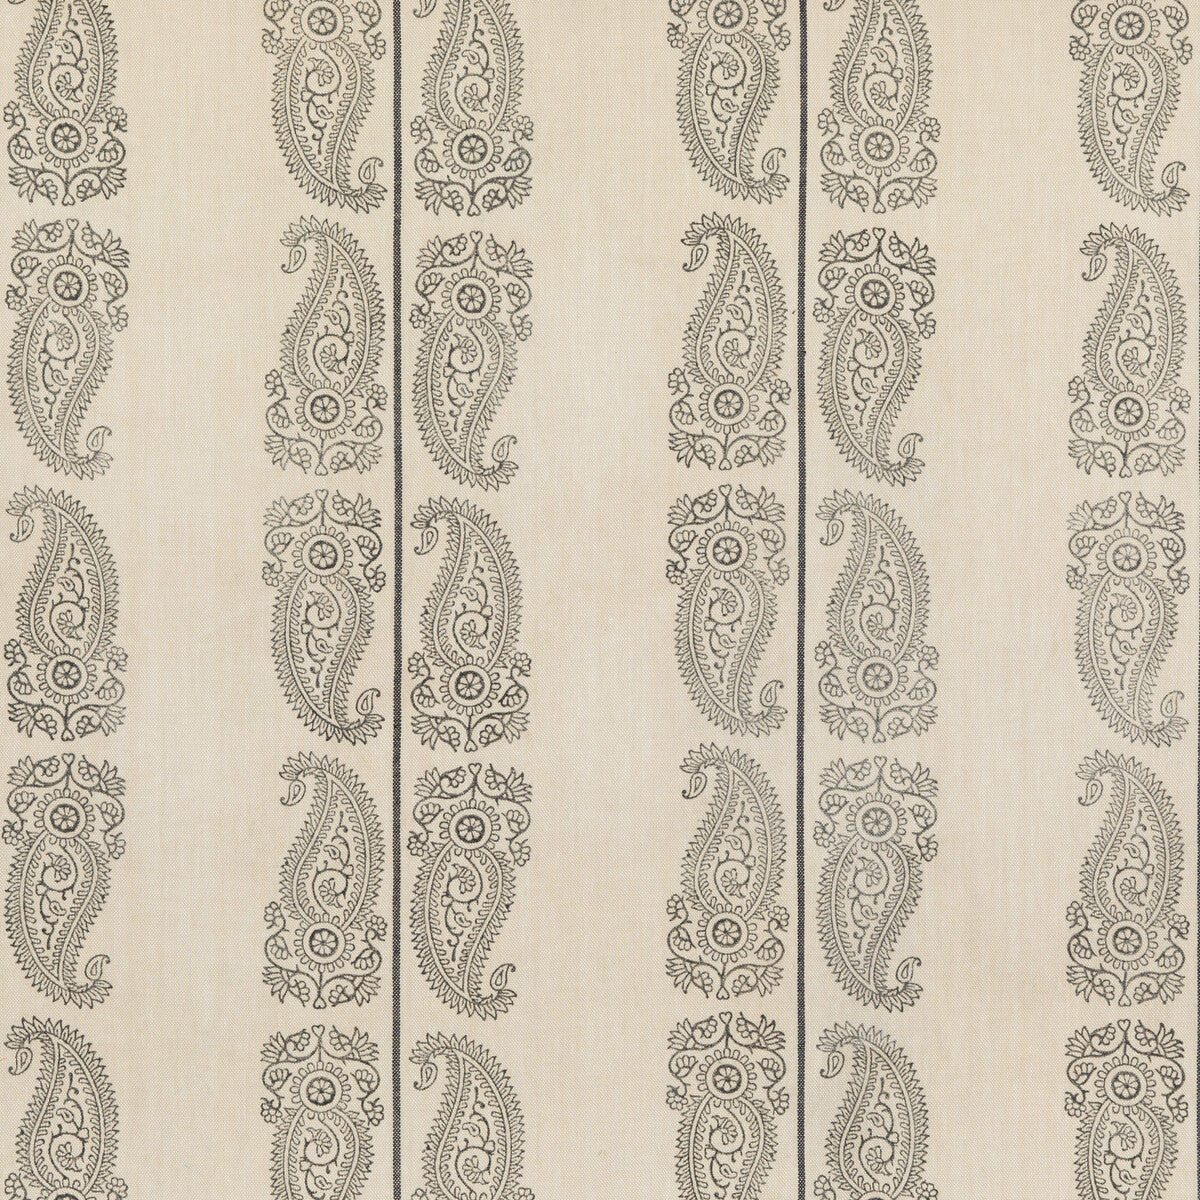 Cromer Paisley fabric in charcoal color - pattern BP10796.4.0 - by G P &amp; J Baker in the Artisan II collection